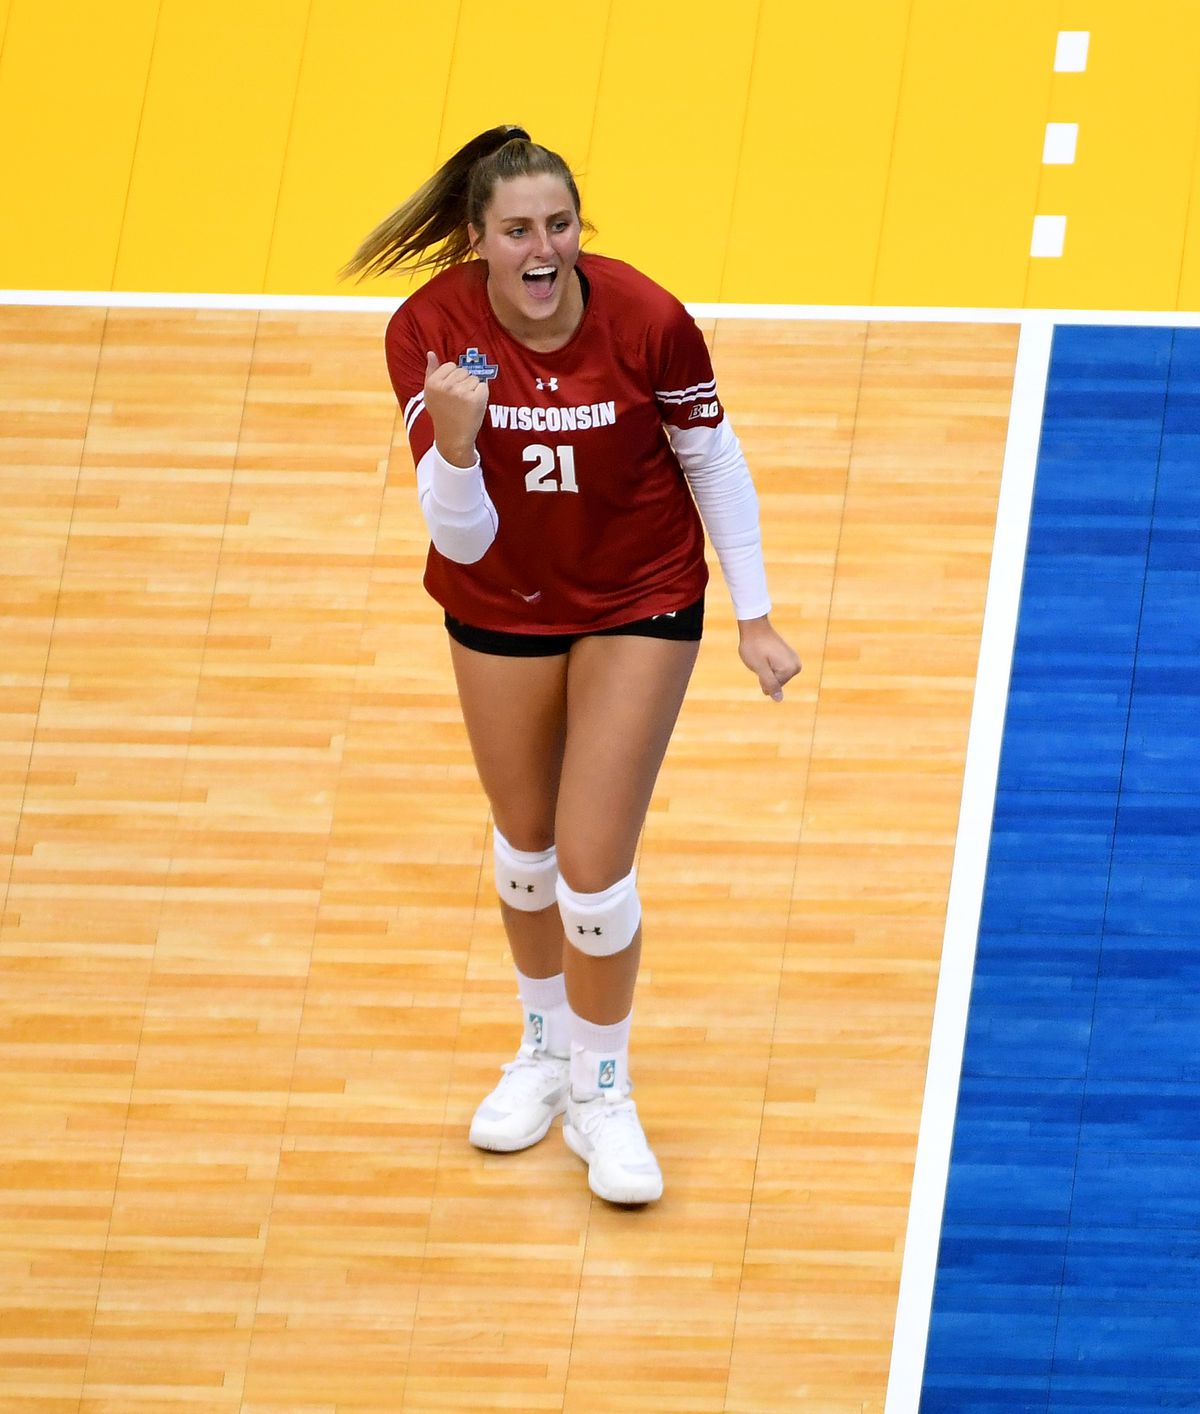 2019 NCAA Division I Women’s Volleyball Championship Semifinals